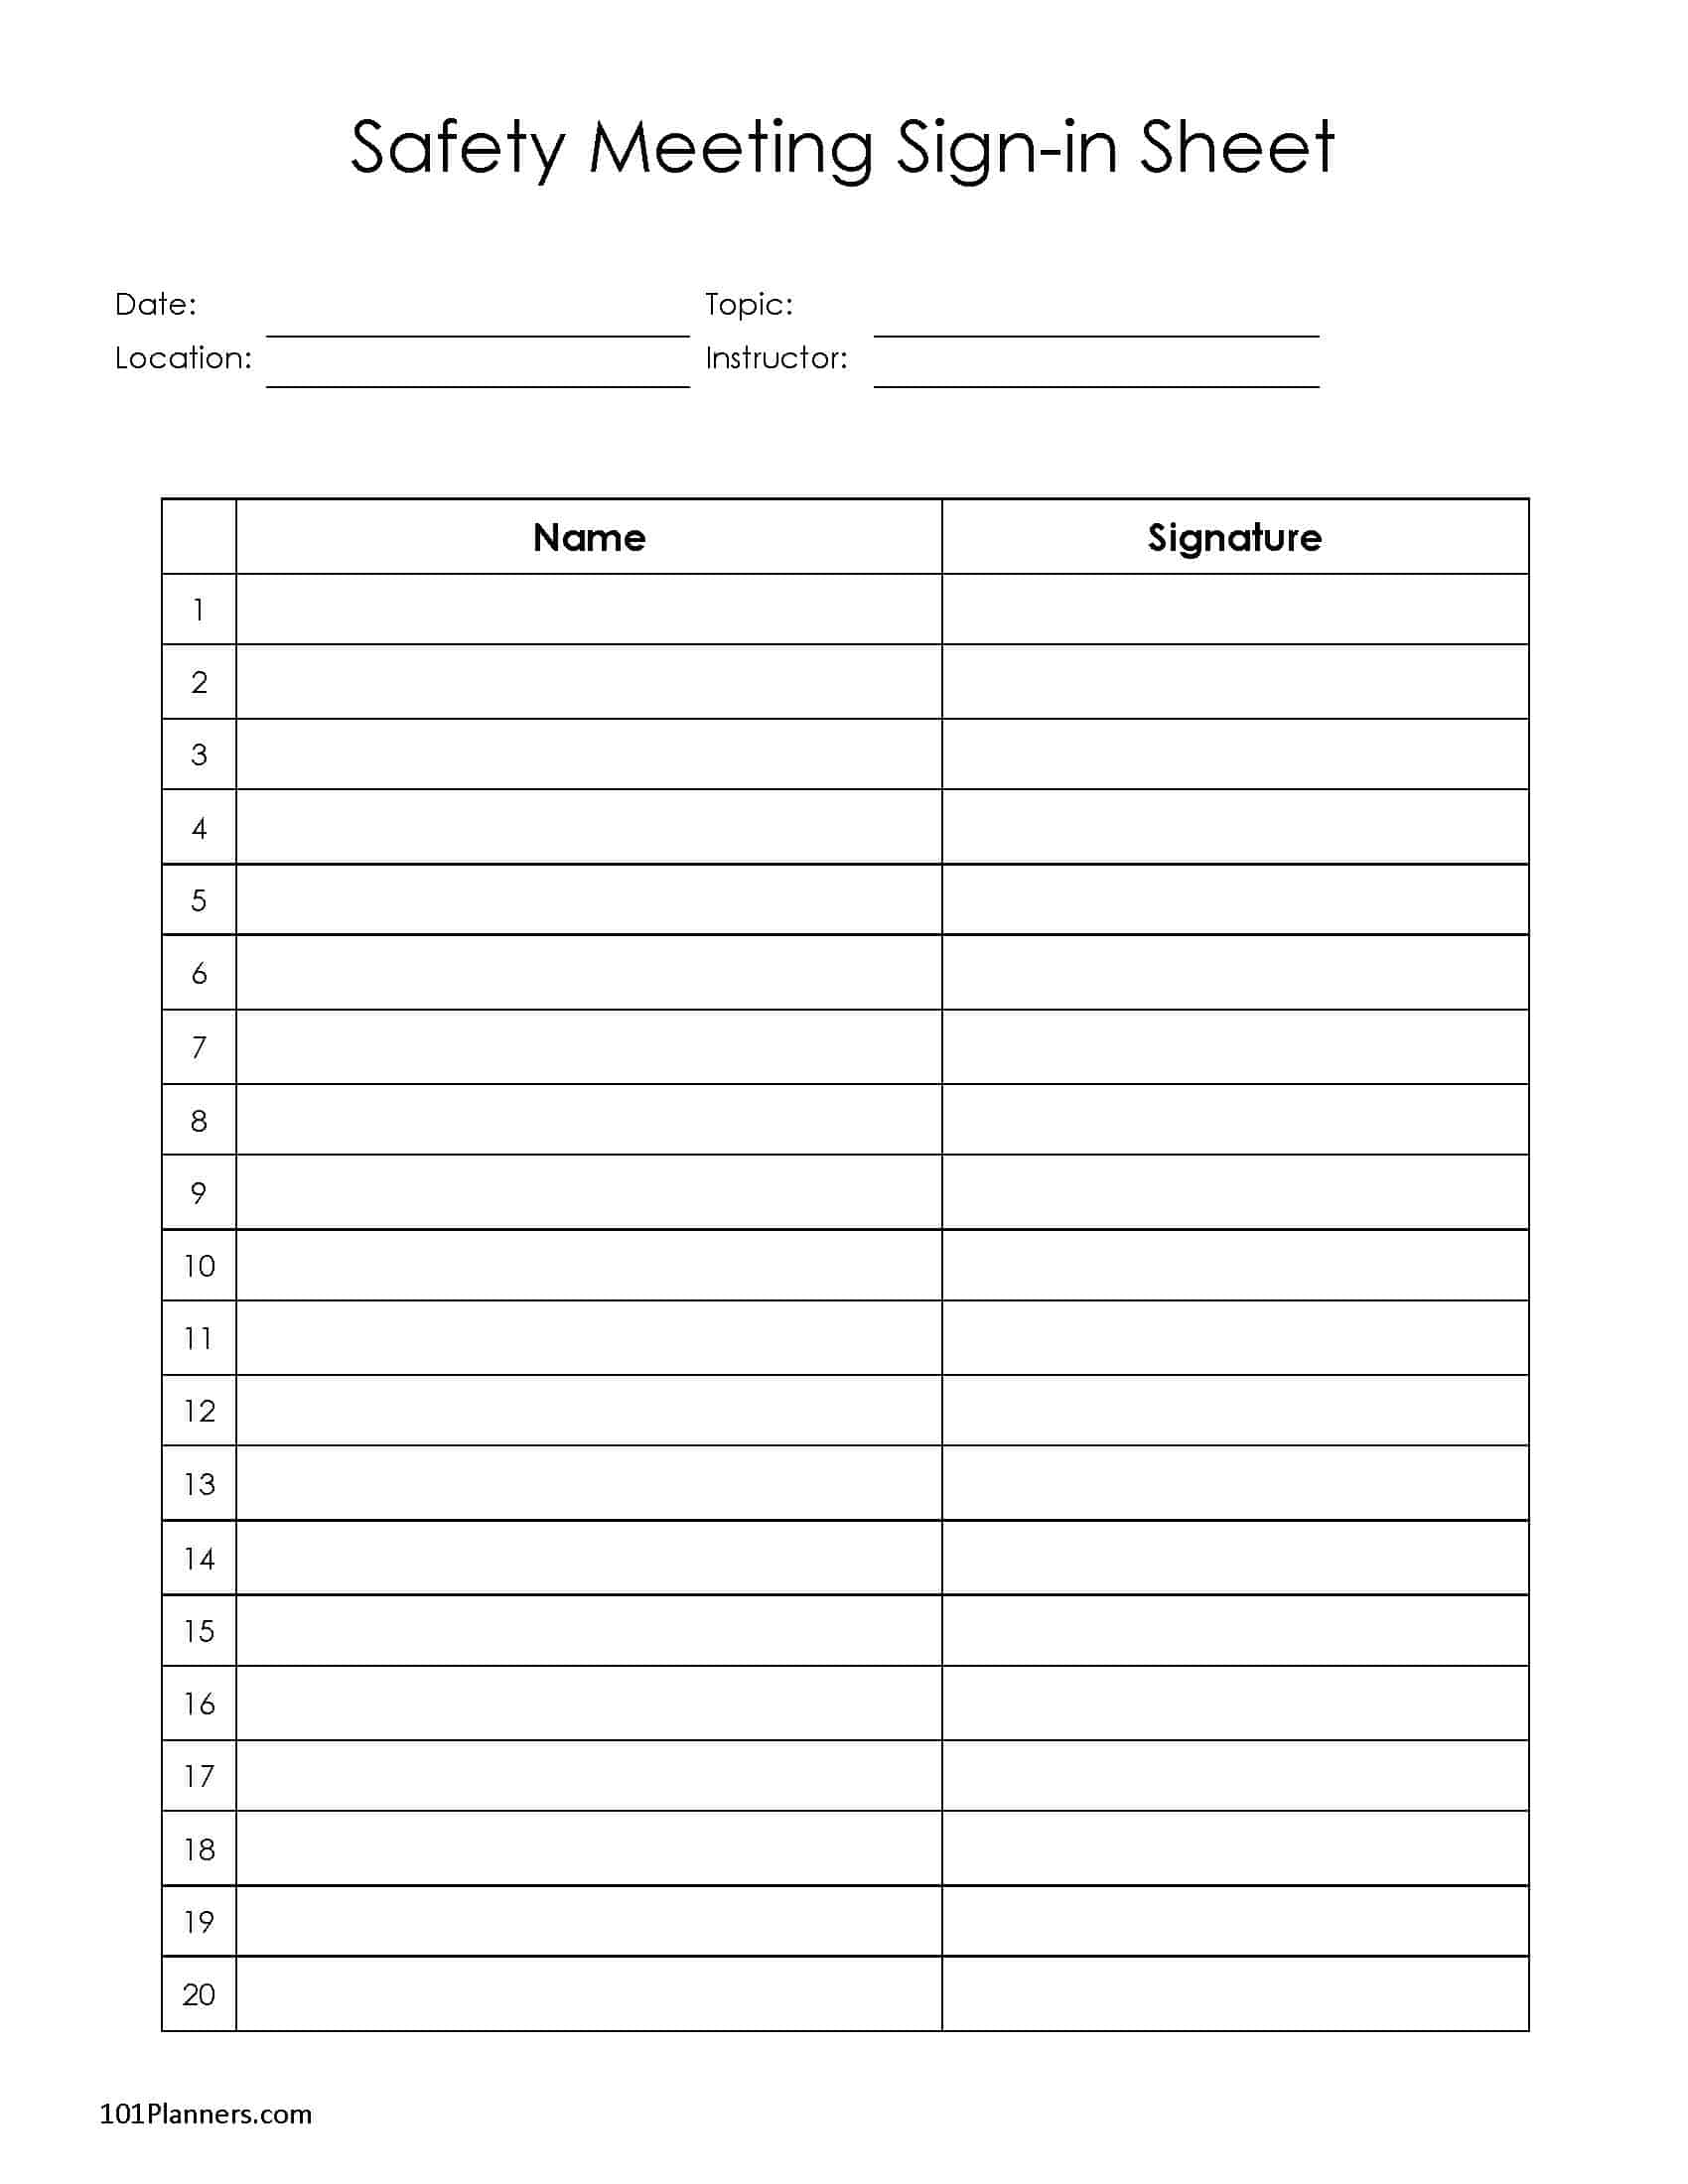 FREE Sign Up Sheet Sign In Sheet Instant Download